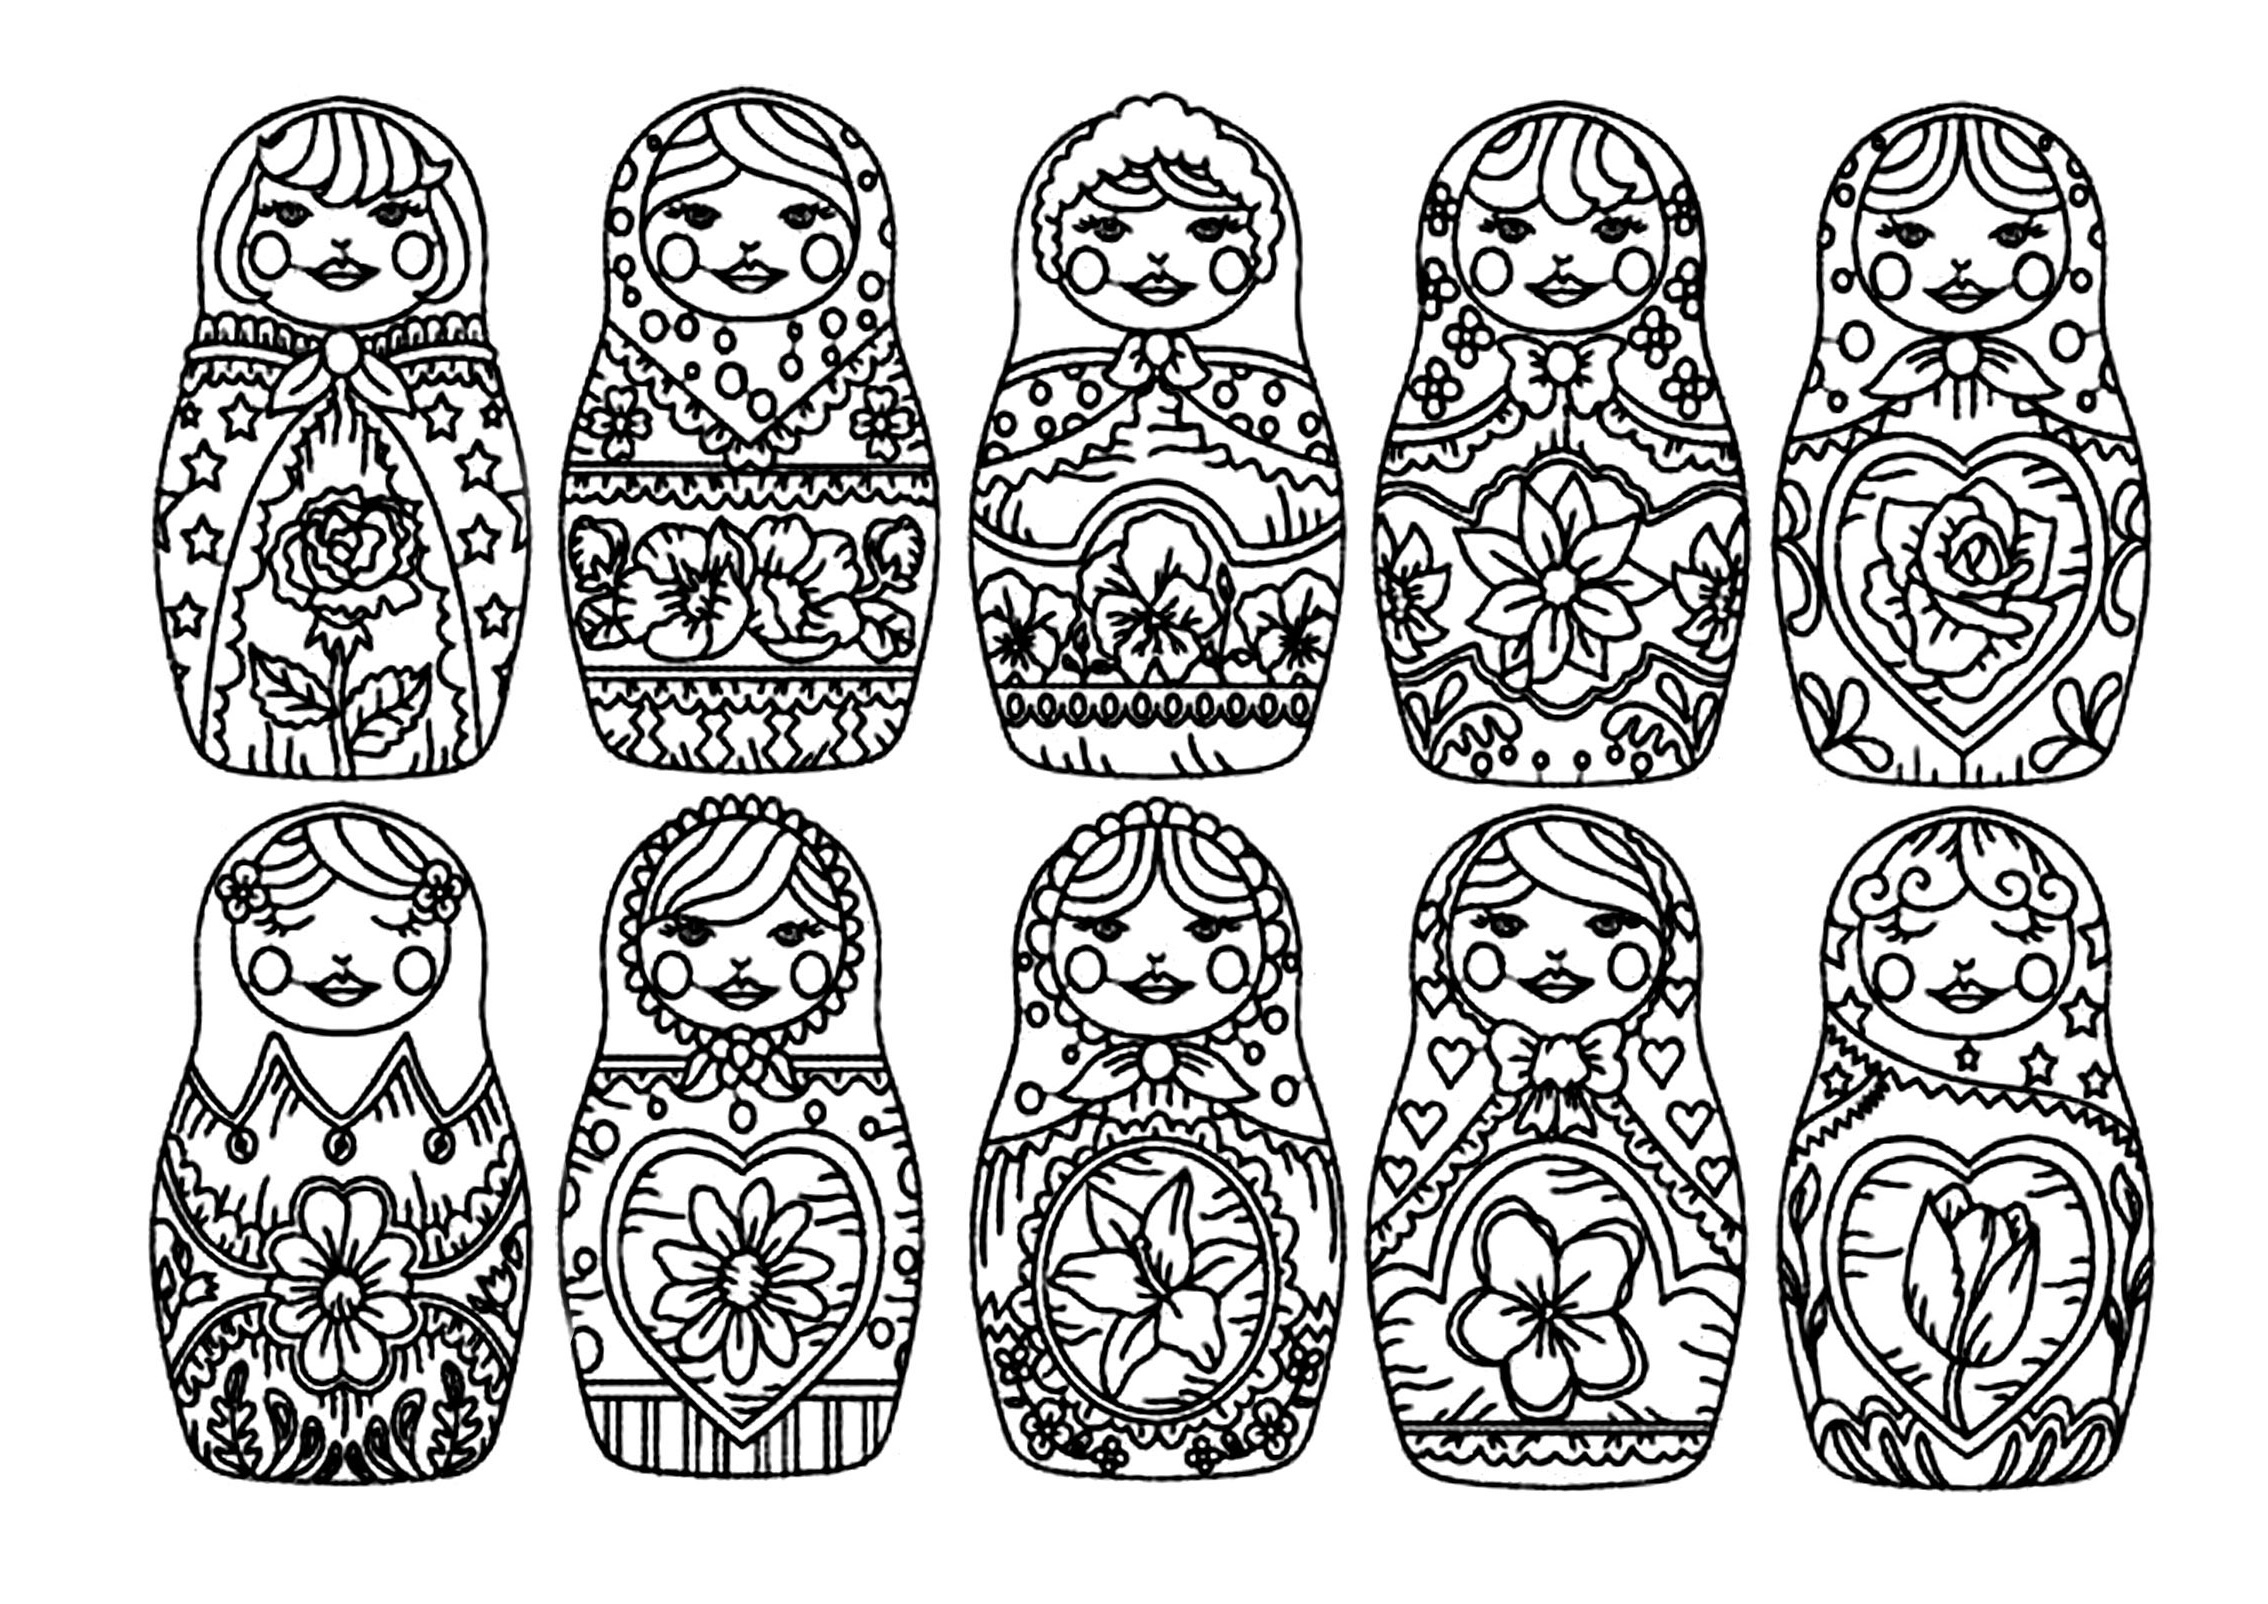 image=poupees russes coloriage pourpee russe 1 1